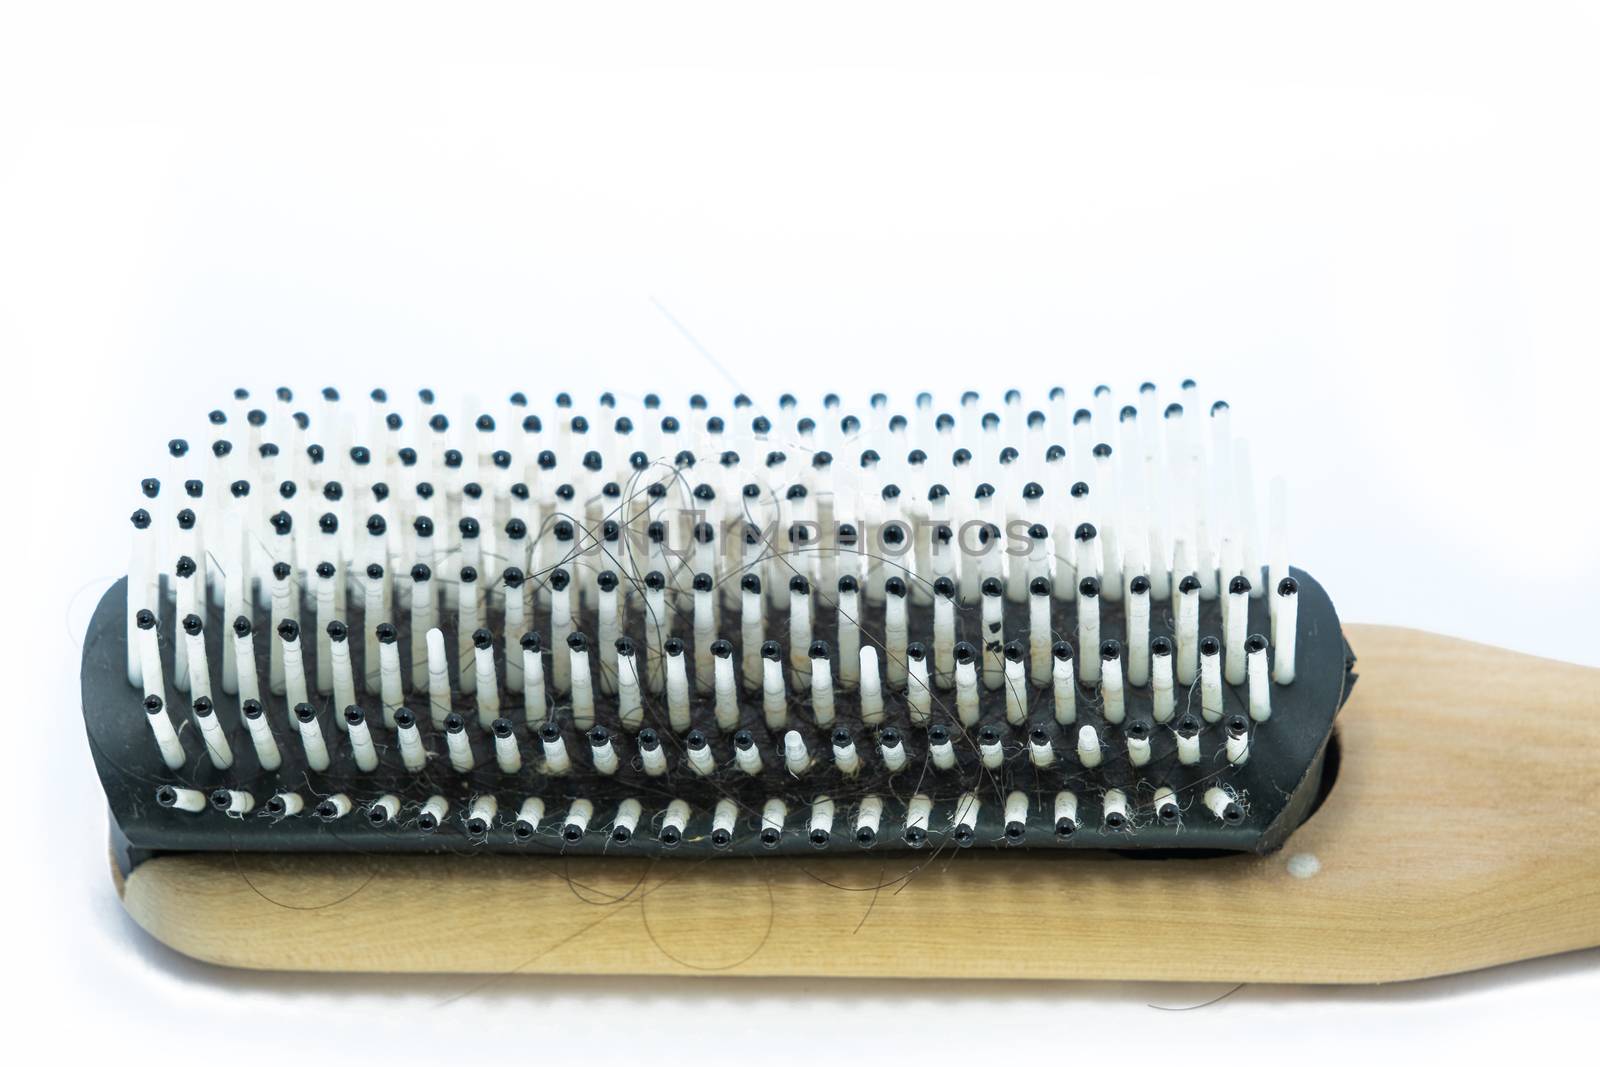 The Close-up Wooden handle Comb with hairs loss on white background.